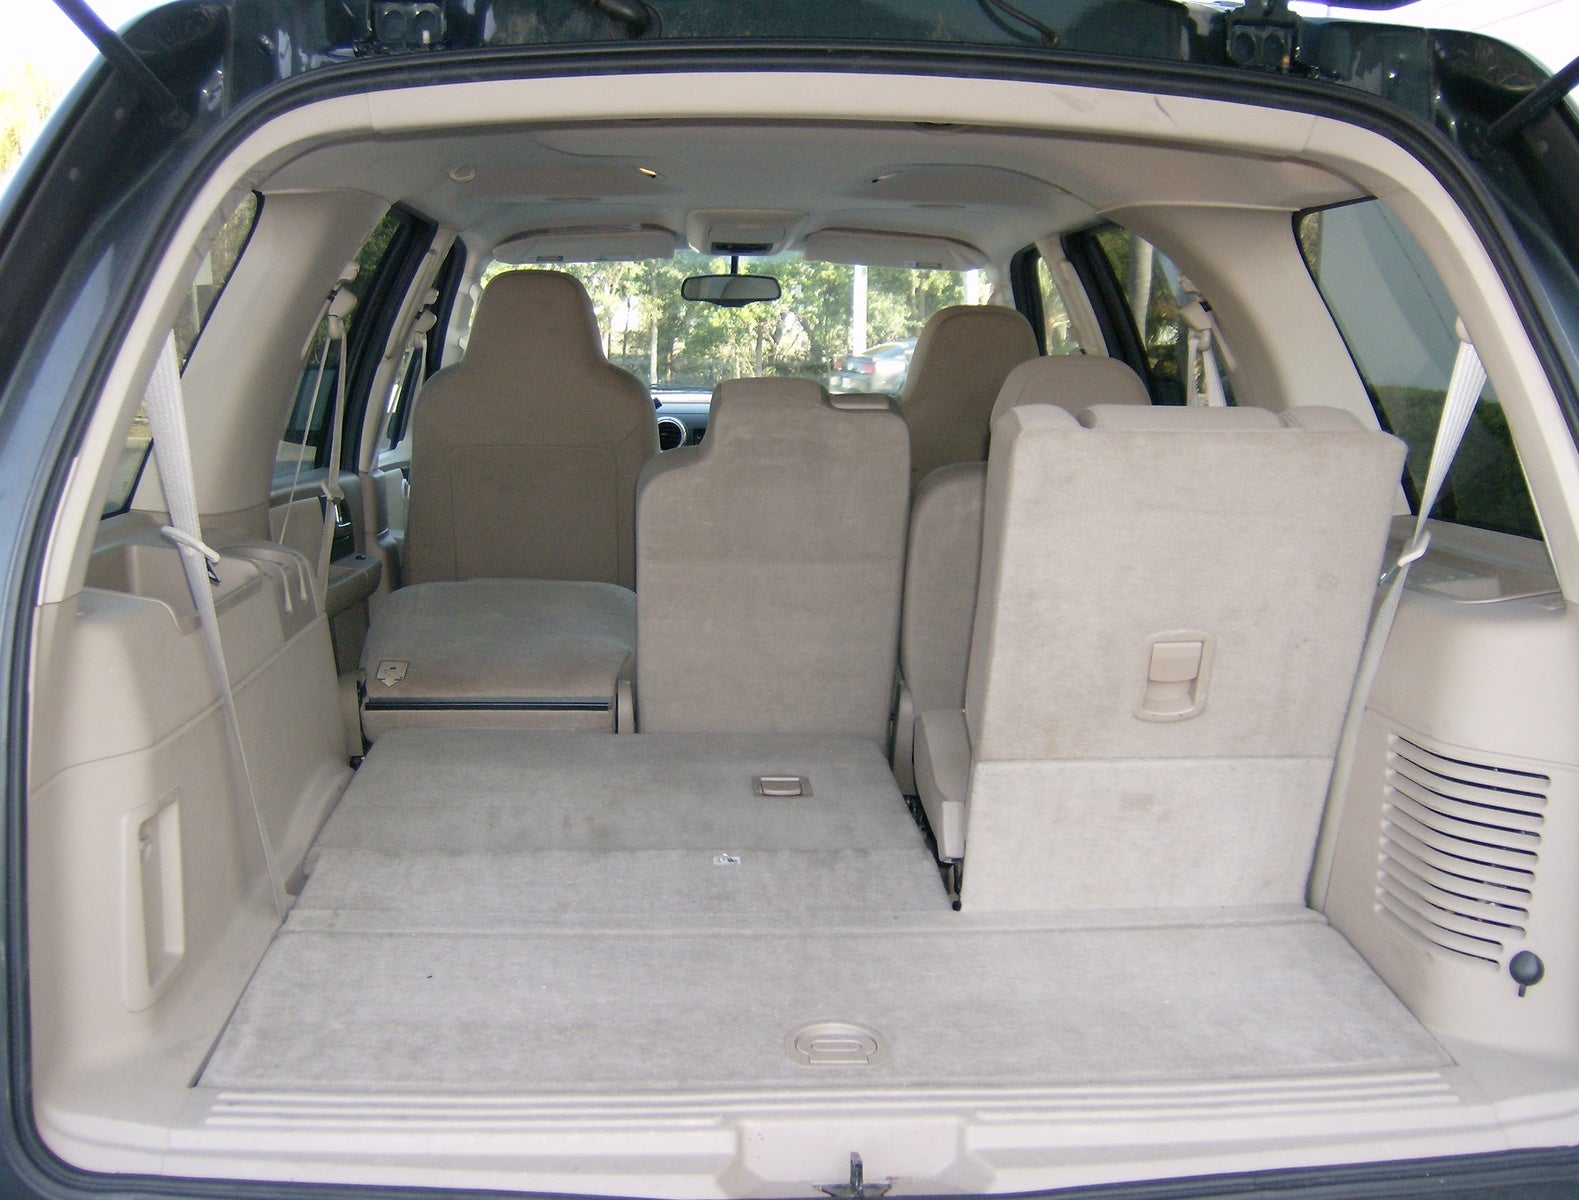 2000 Ford expedition interior dimensions #6